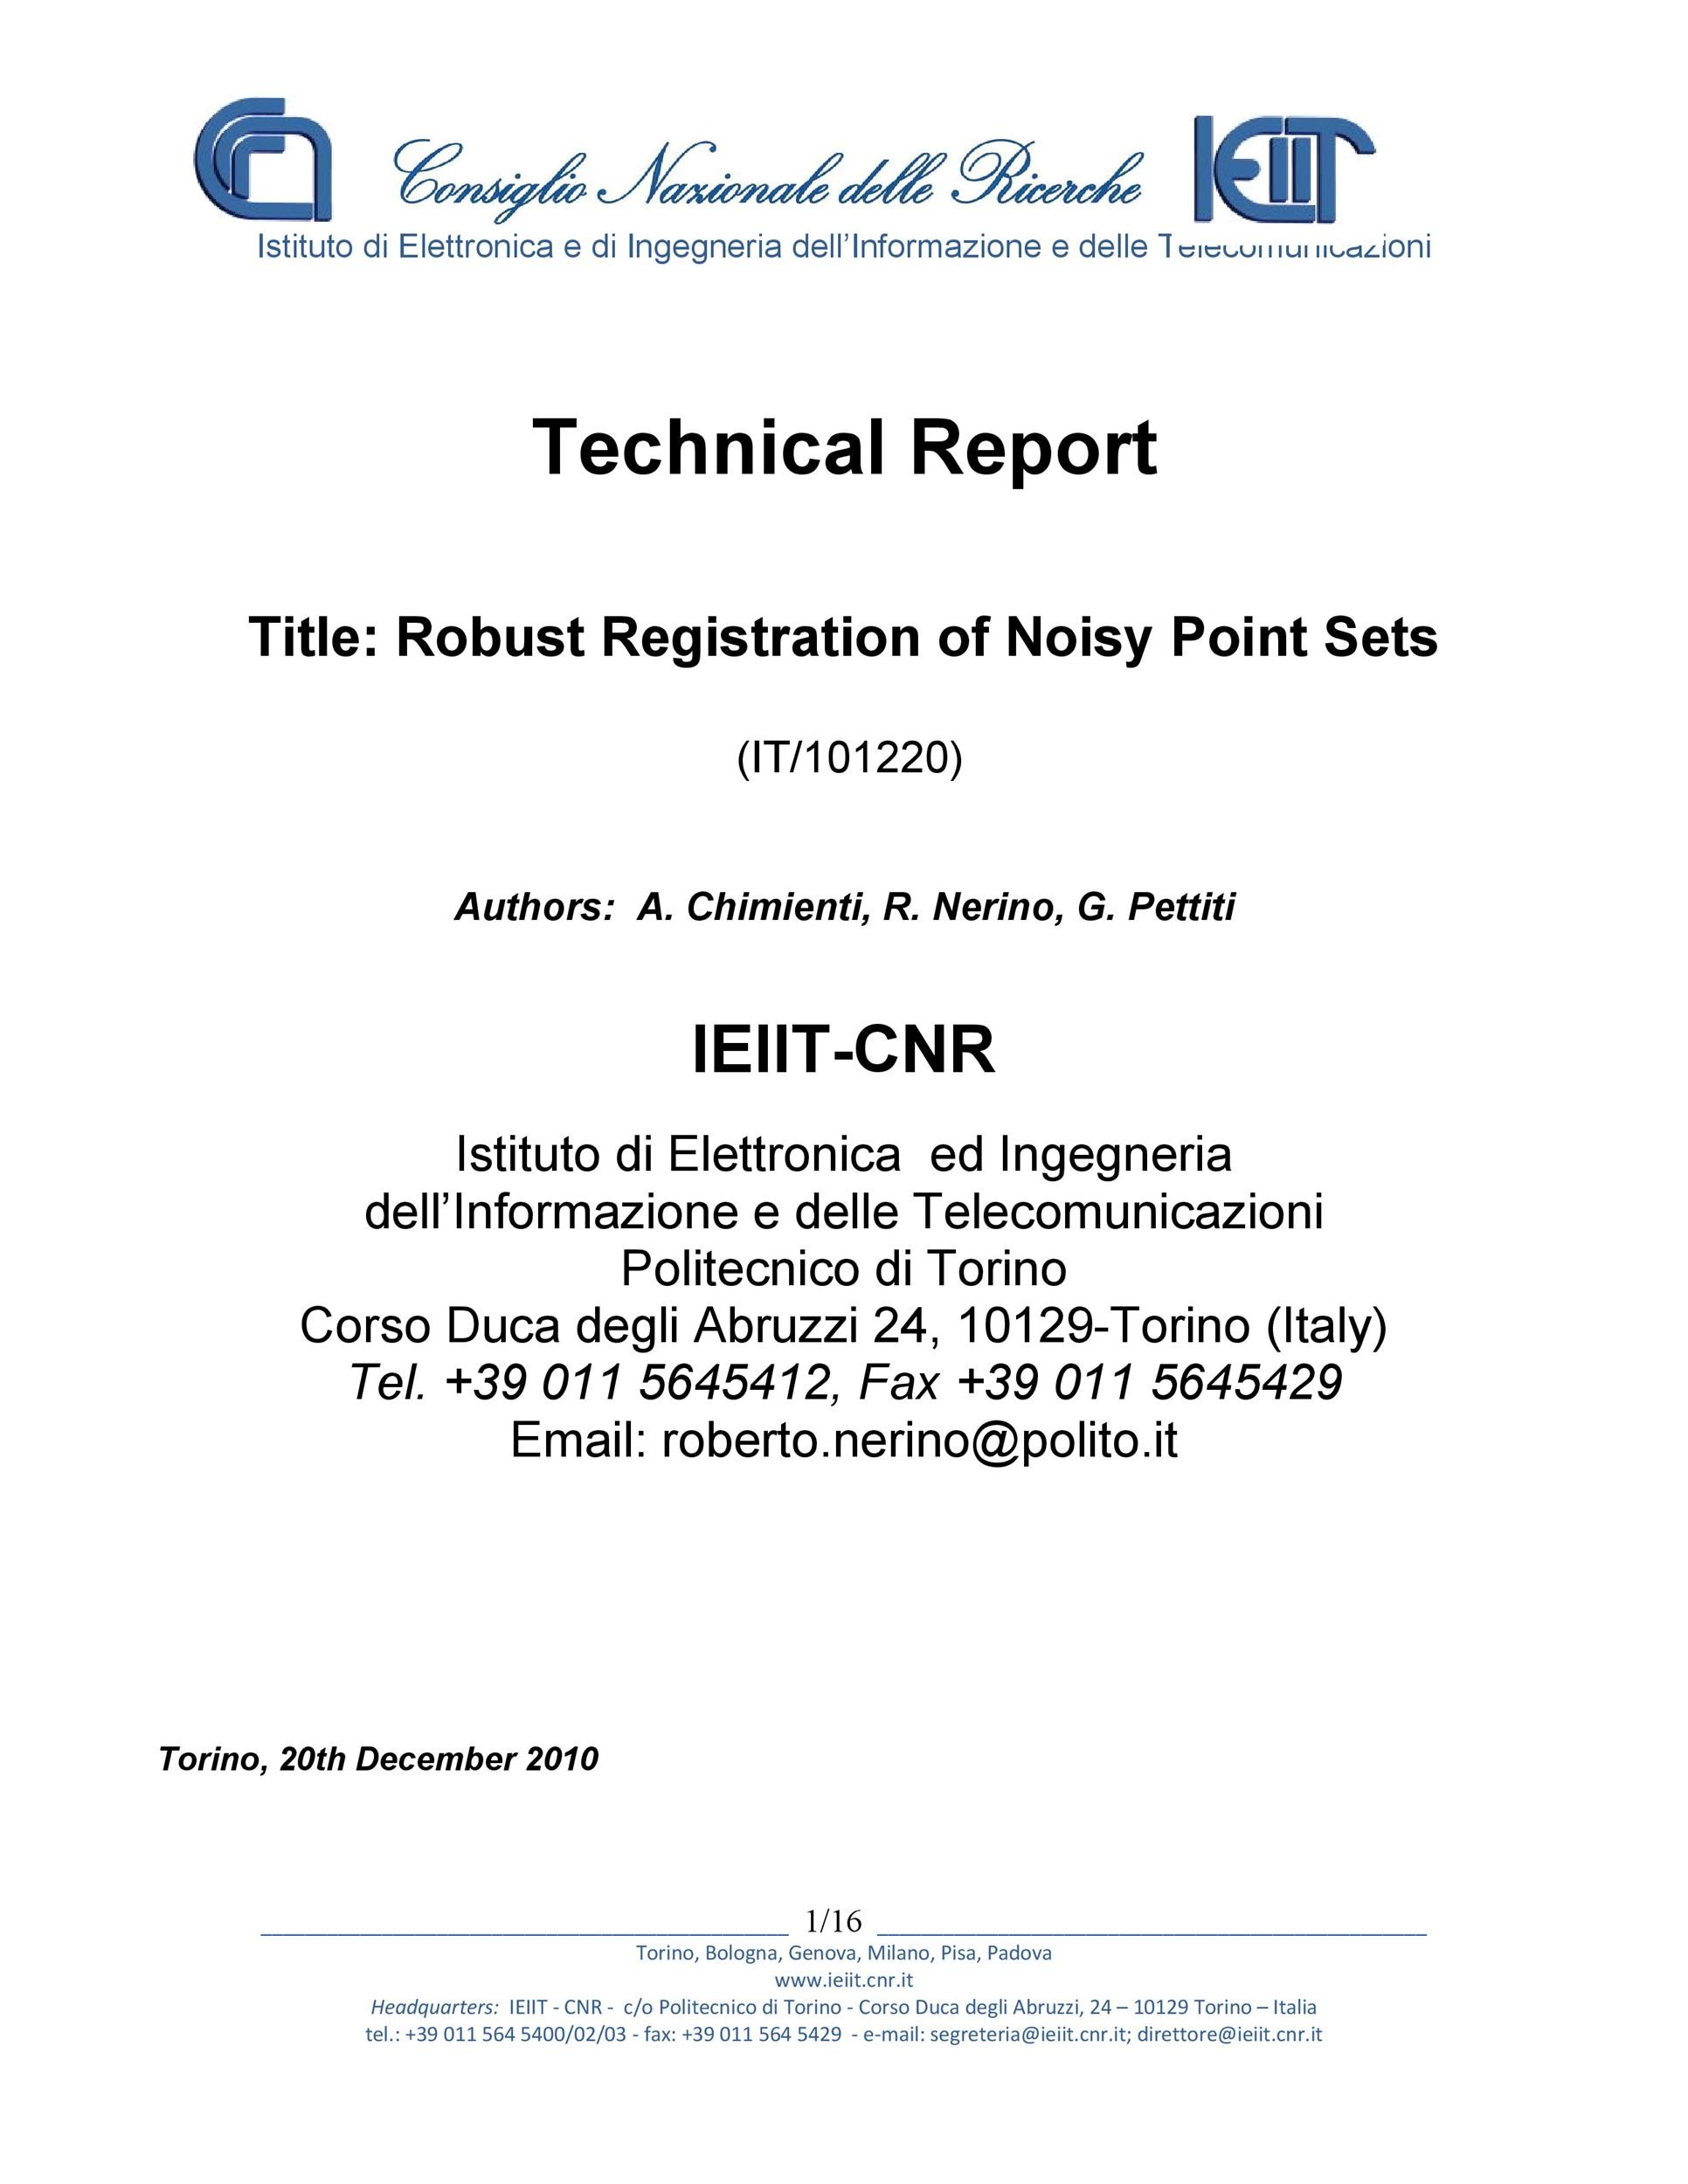 how to write a technical report template